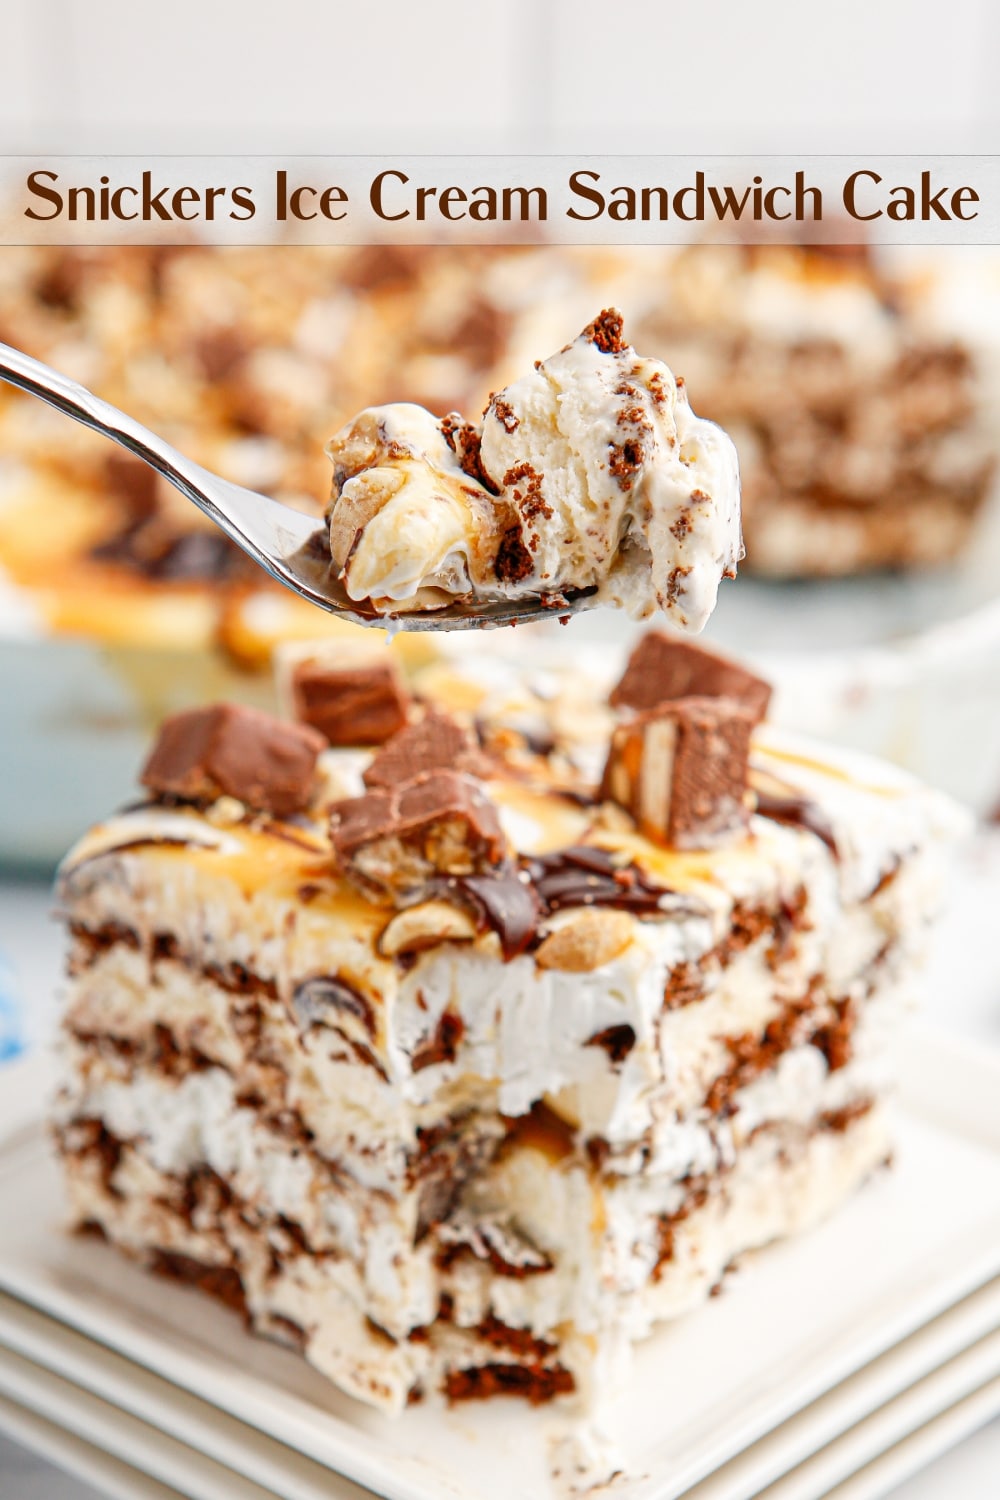 Easy and impressive, this indulgent Snickers Ice Cream Sandwich Cake is ready to serve at your next celebration. Layers of ice cream sandwiches and whipped topping create the base of this decadently, delicious treat.  via @cmpollak1